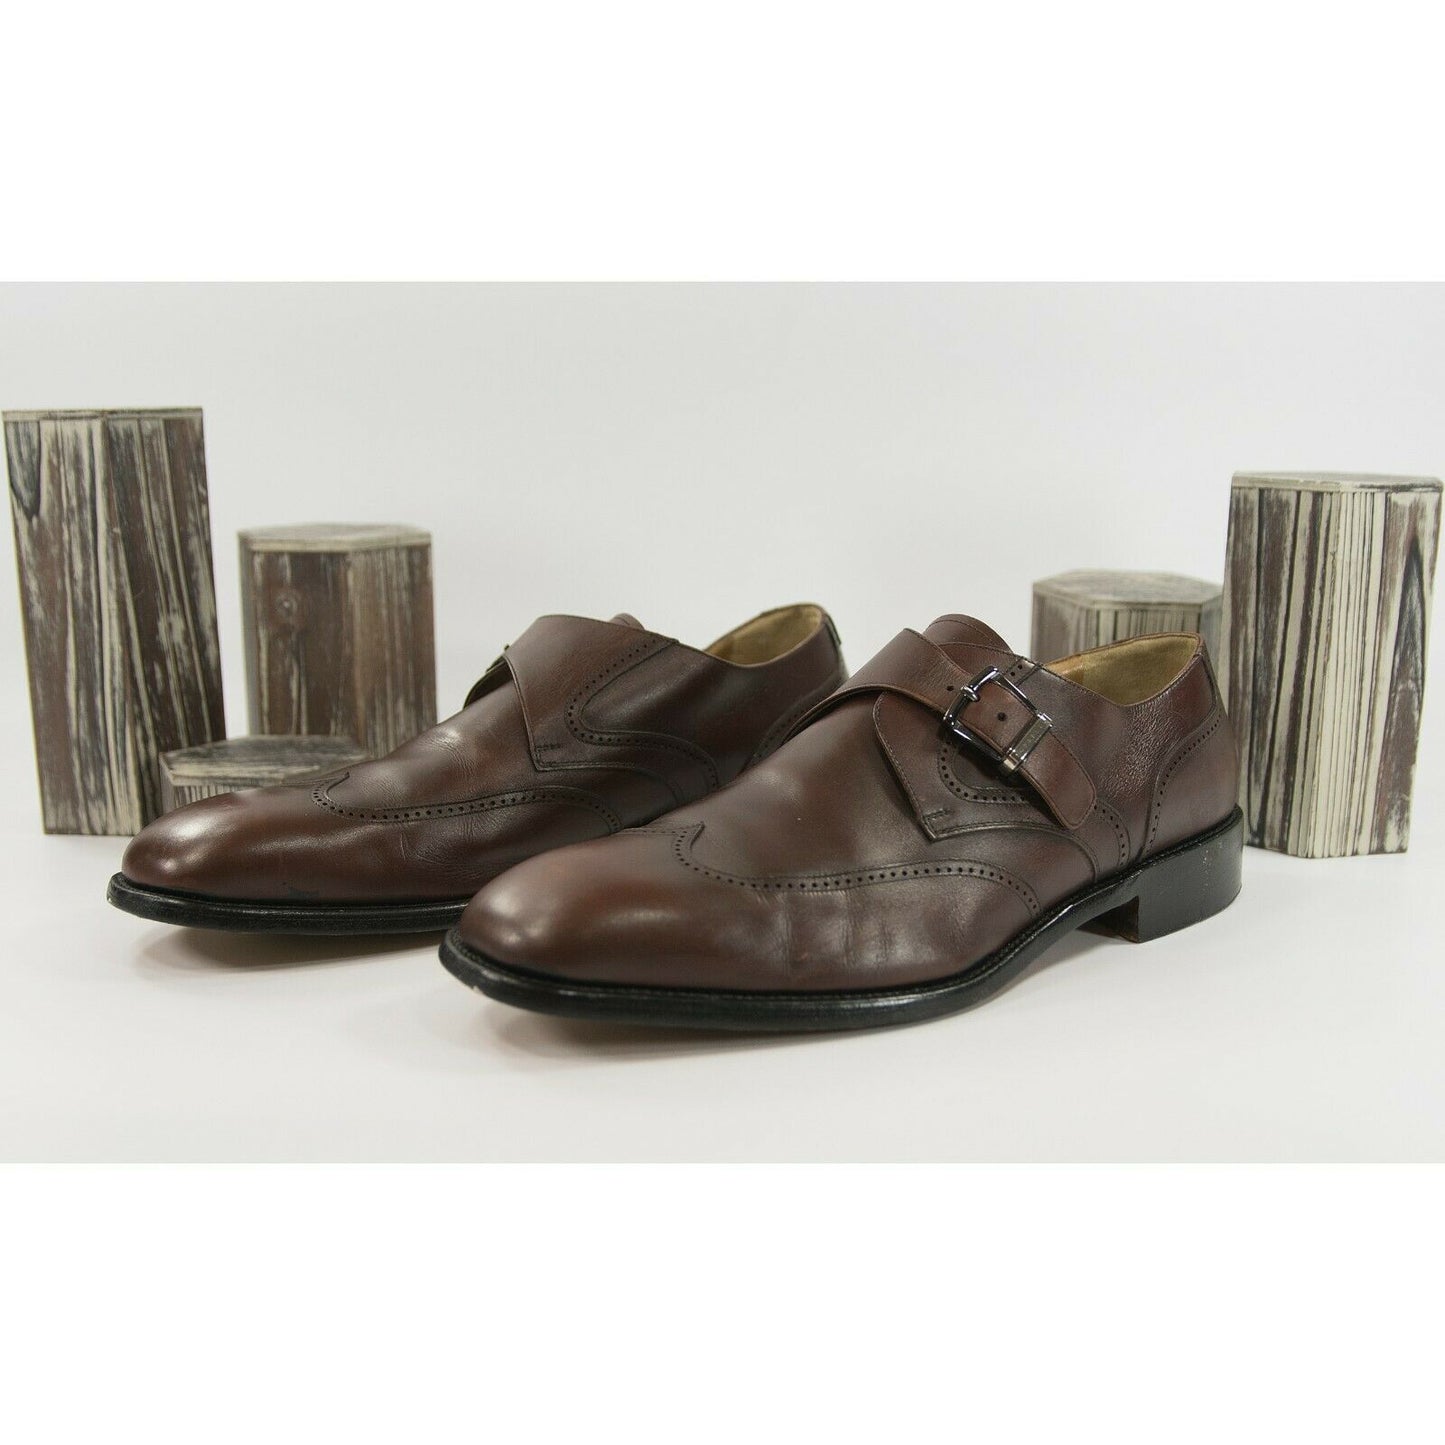 Moreschi Brown Leather Monk Strap Loafer Oxford Size 14